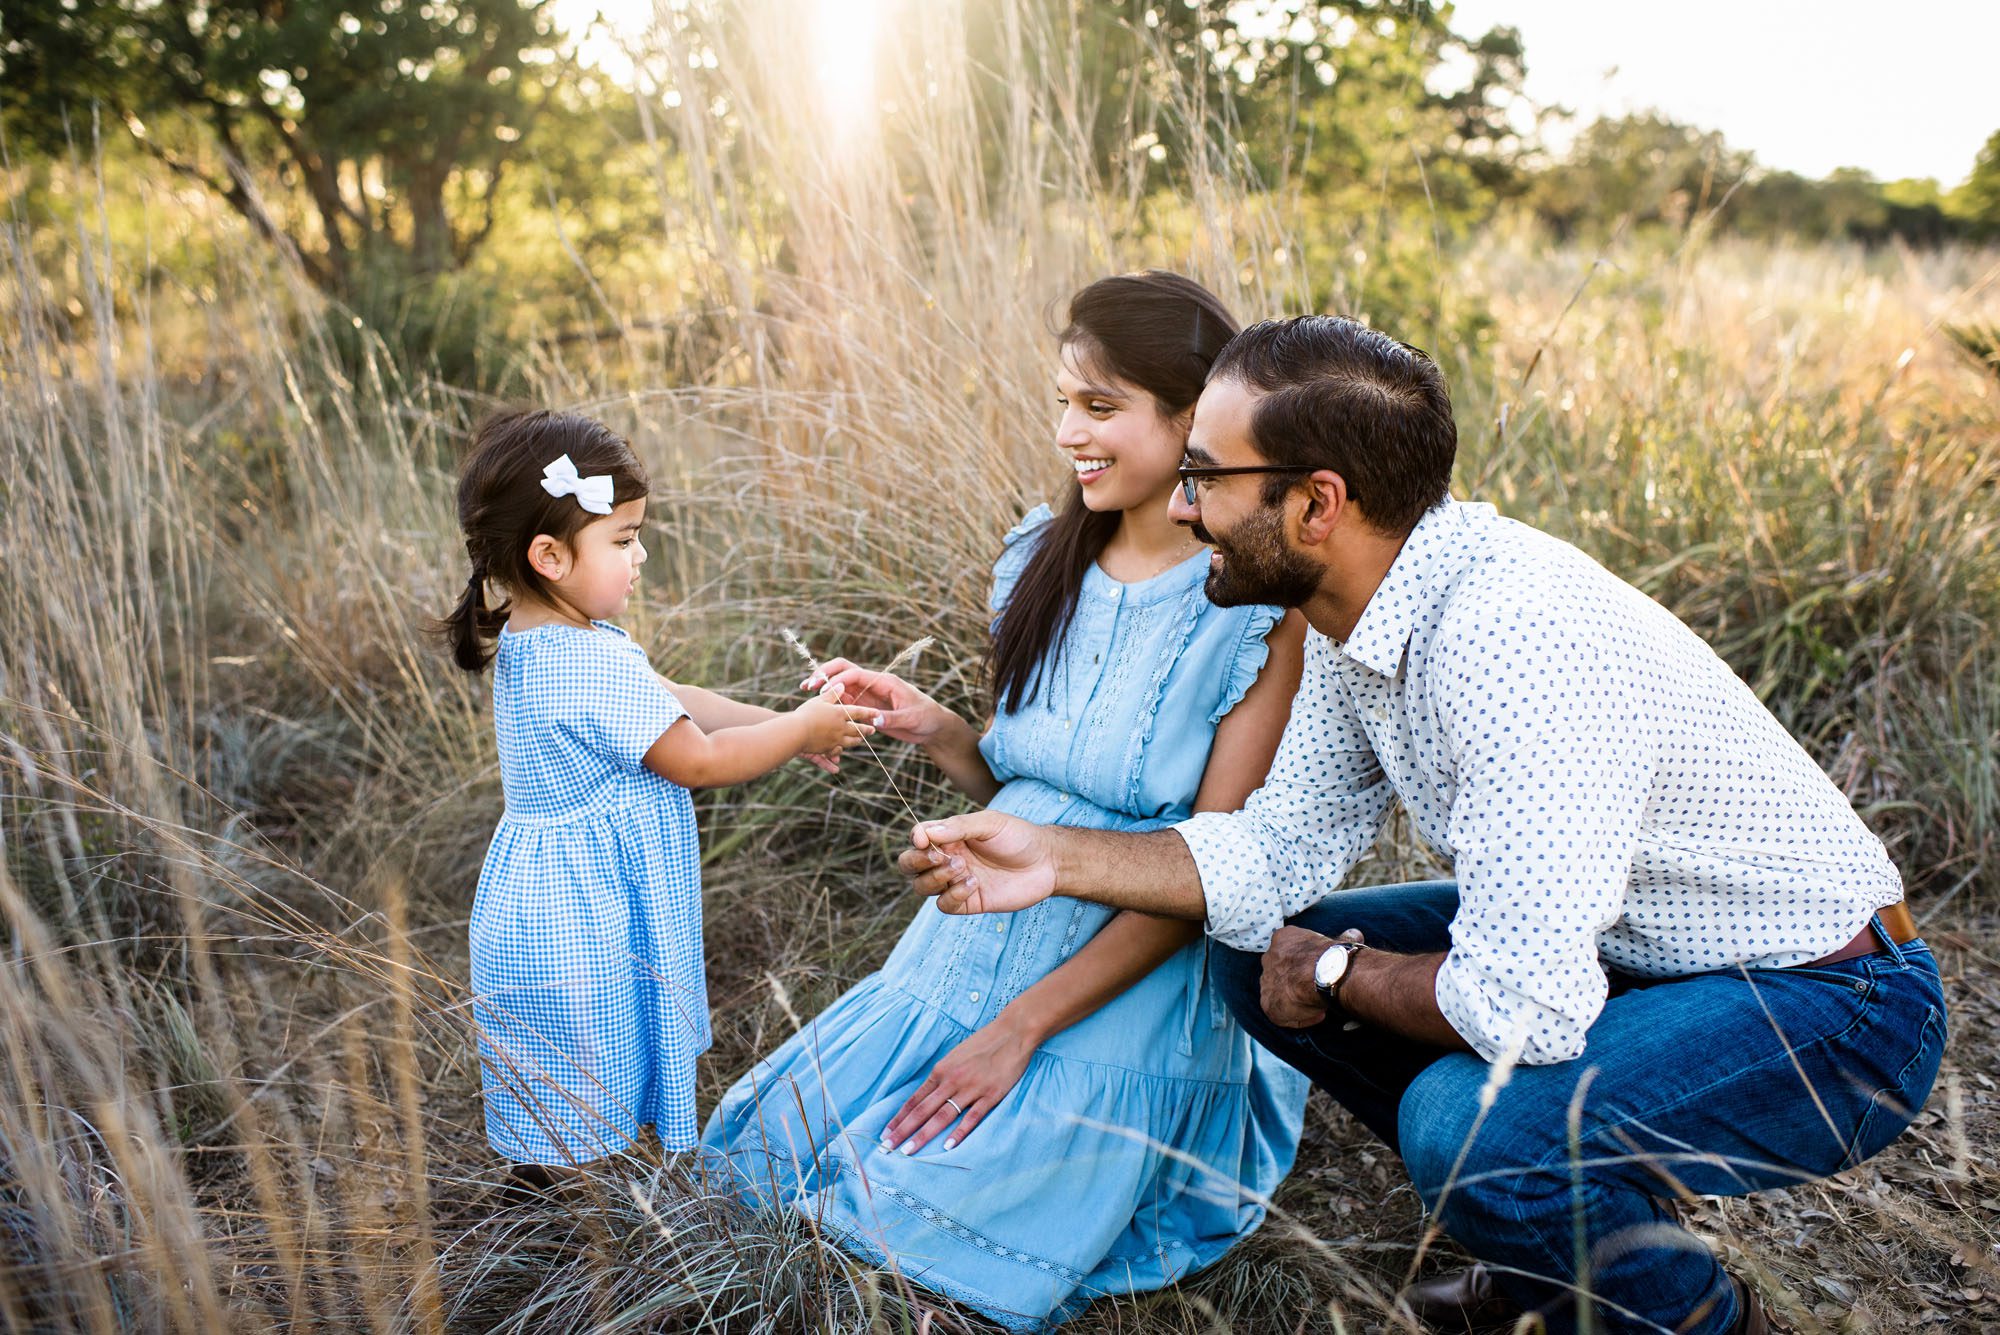 Daughter handing parents a piece of wheat in a field, San Antonio Maternity Photographer